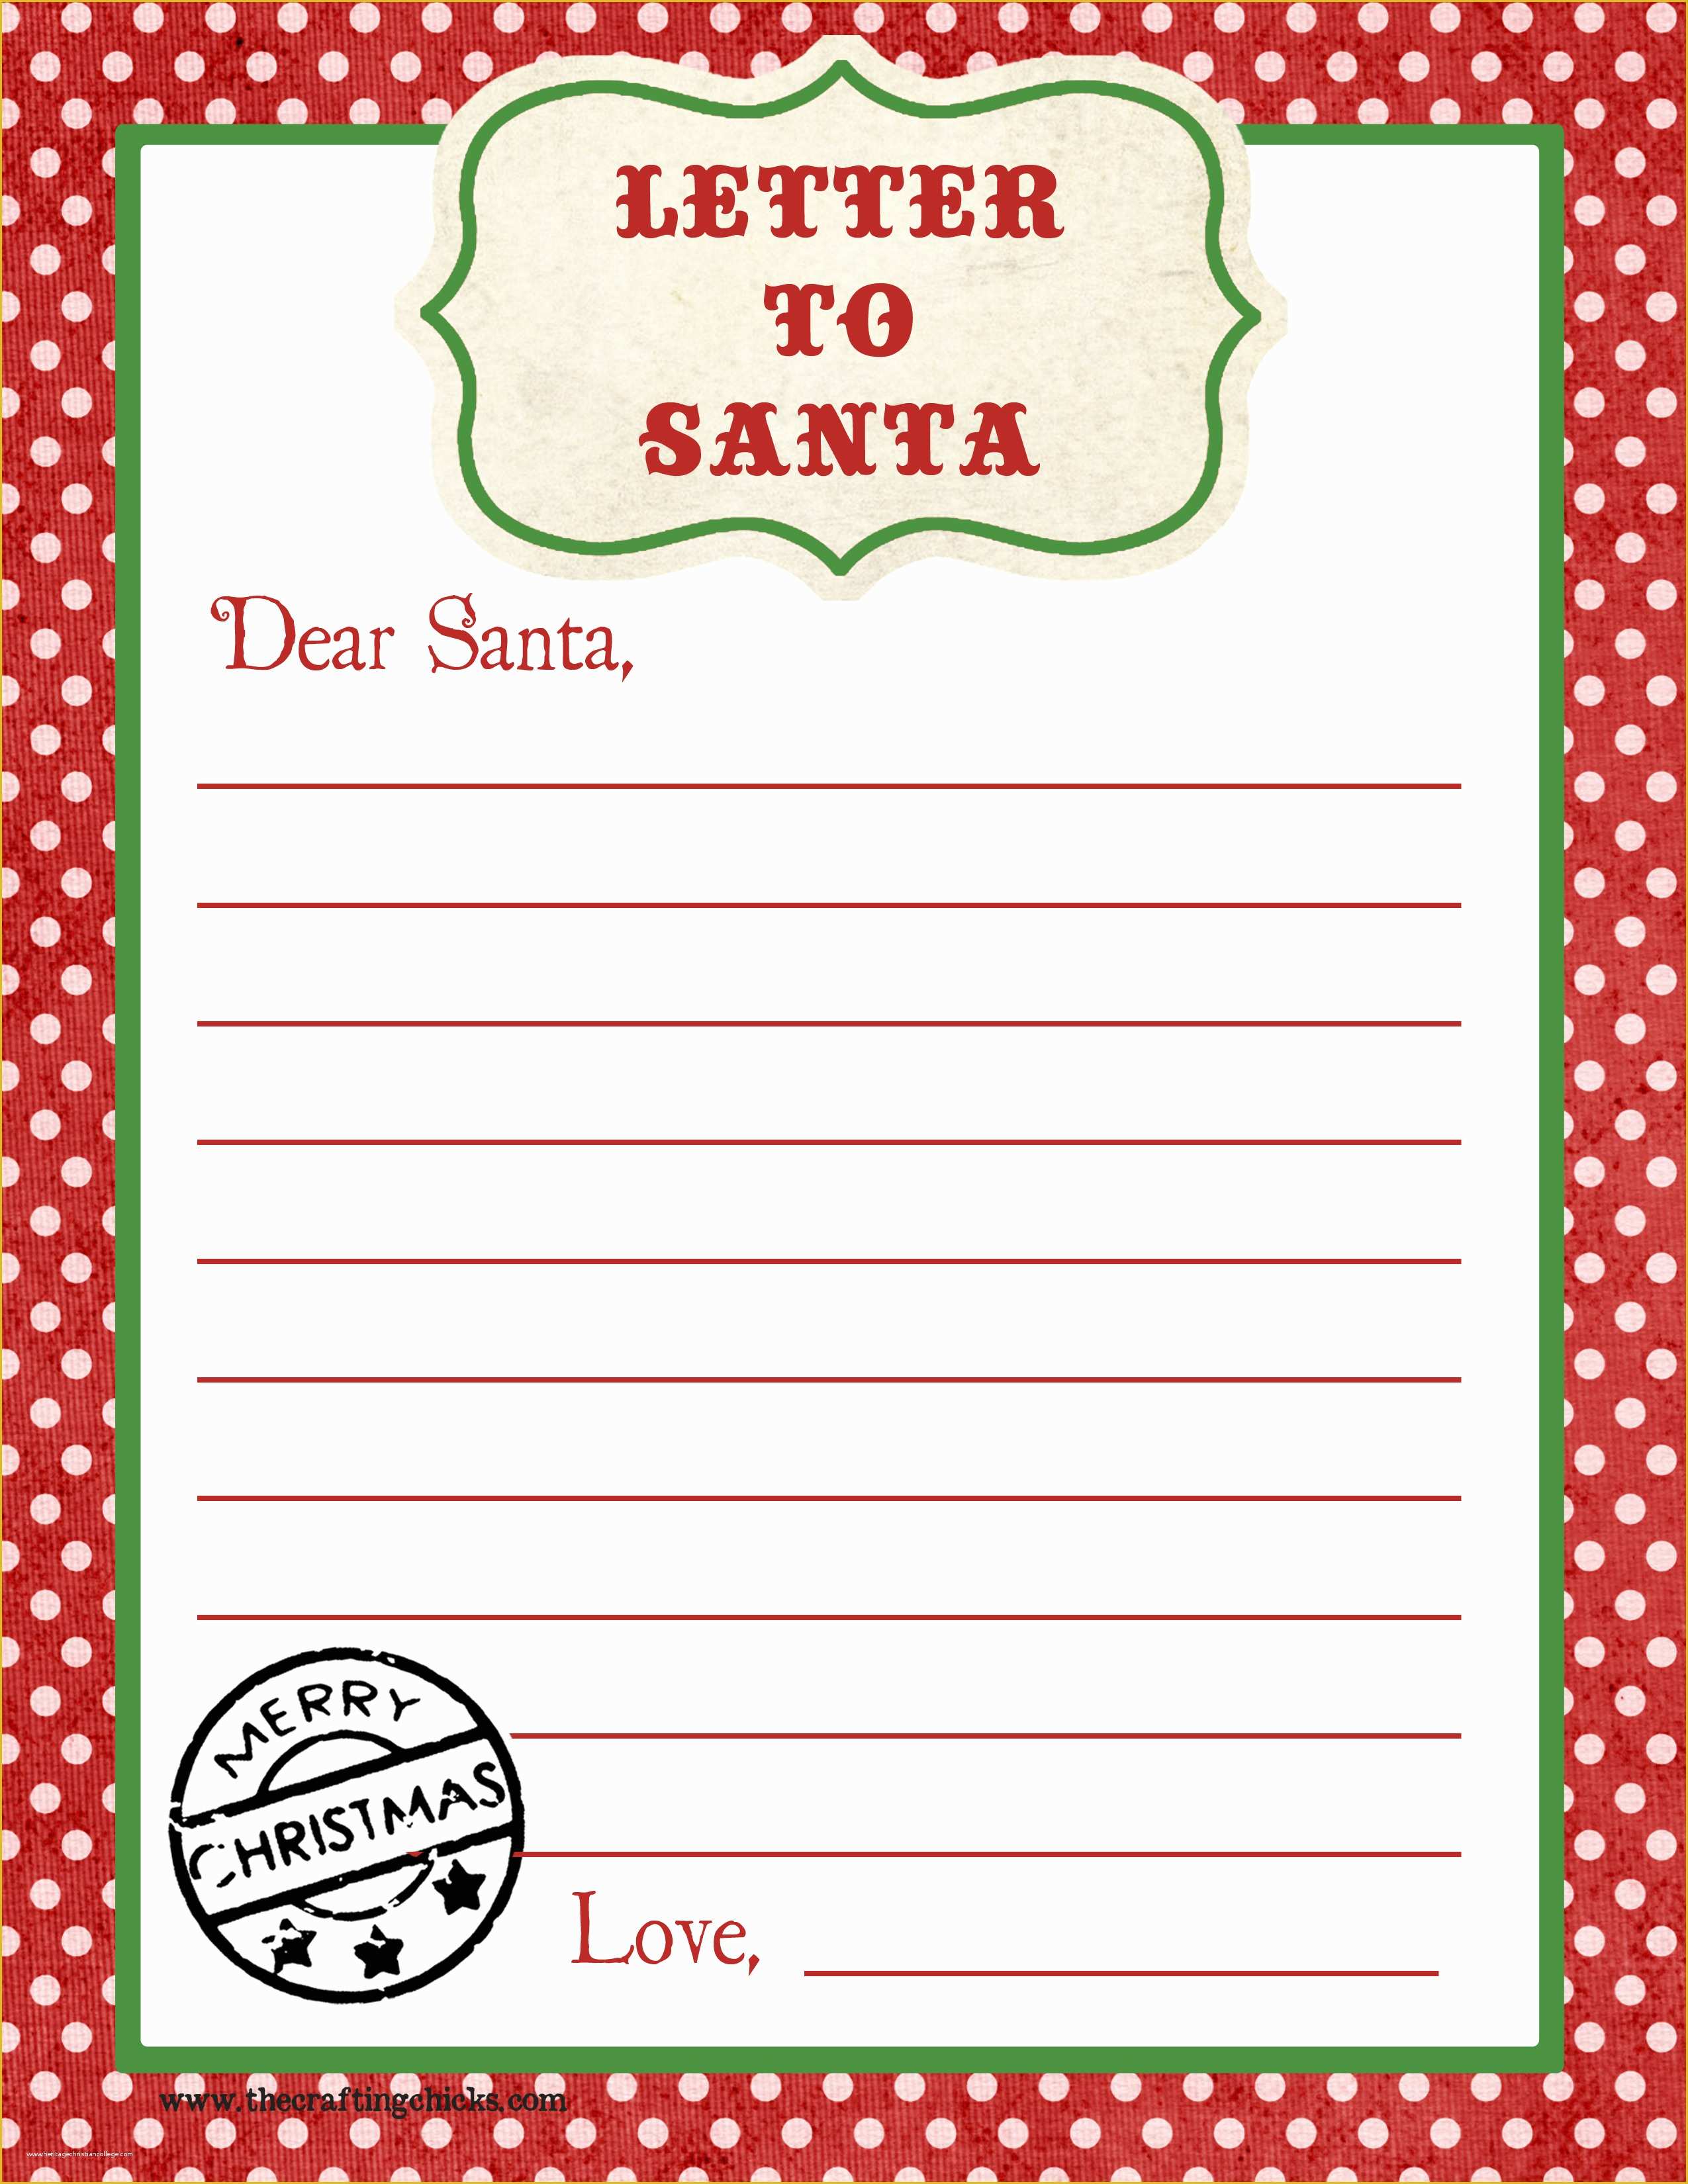 Letter to Santa Template Free Printable Of Letter to Santa Free Printable Download